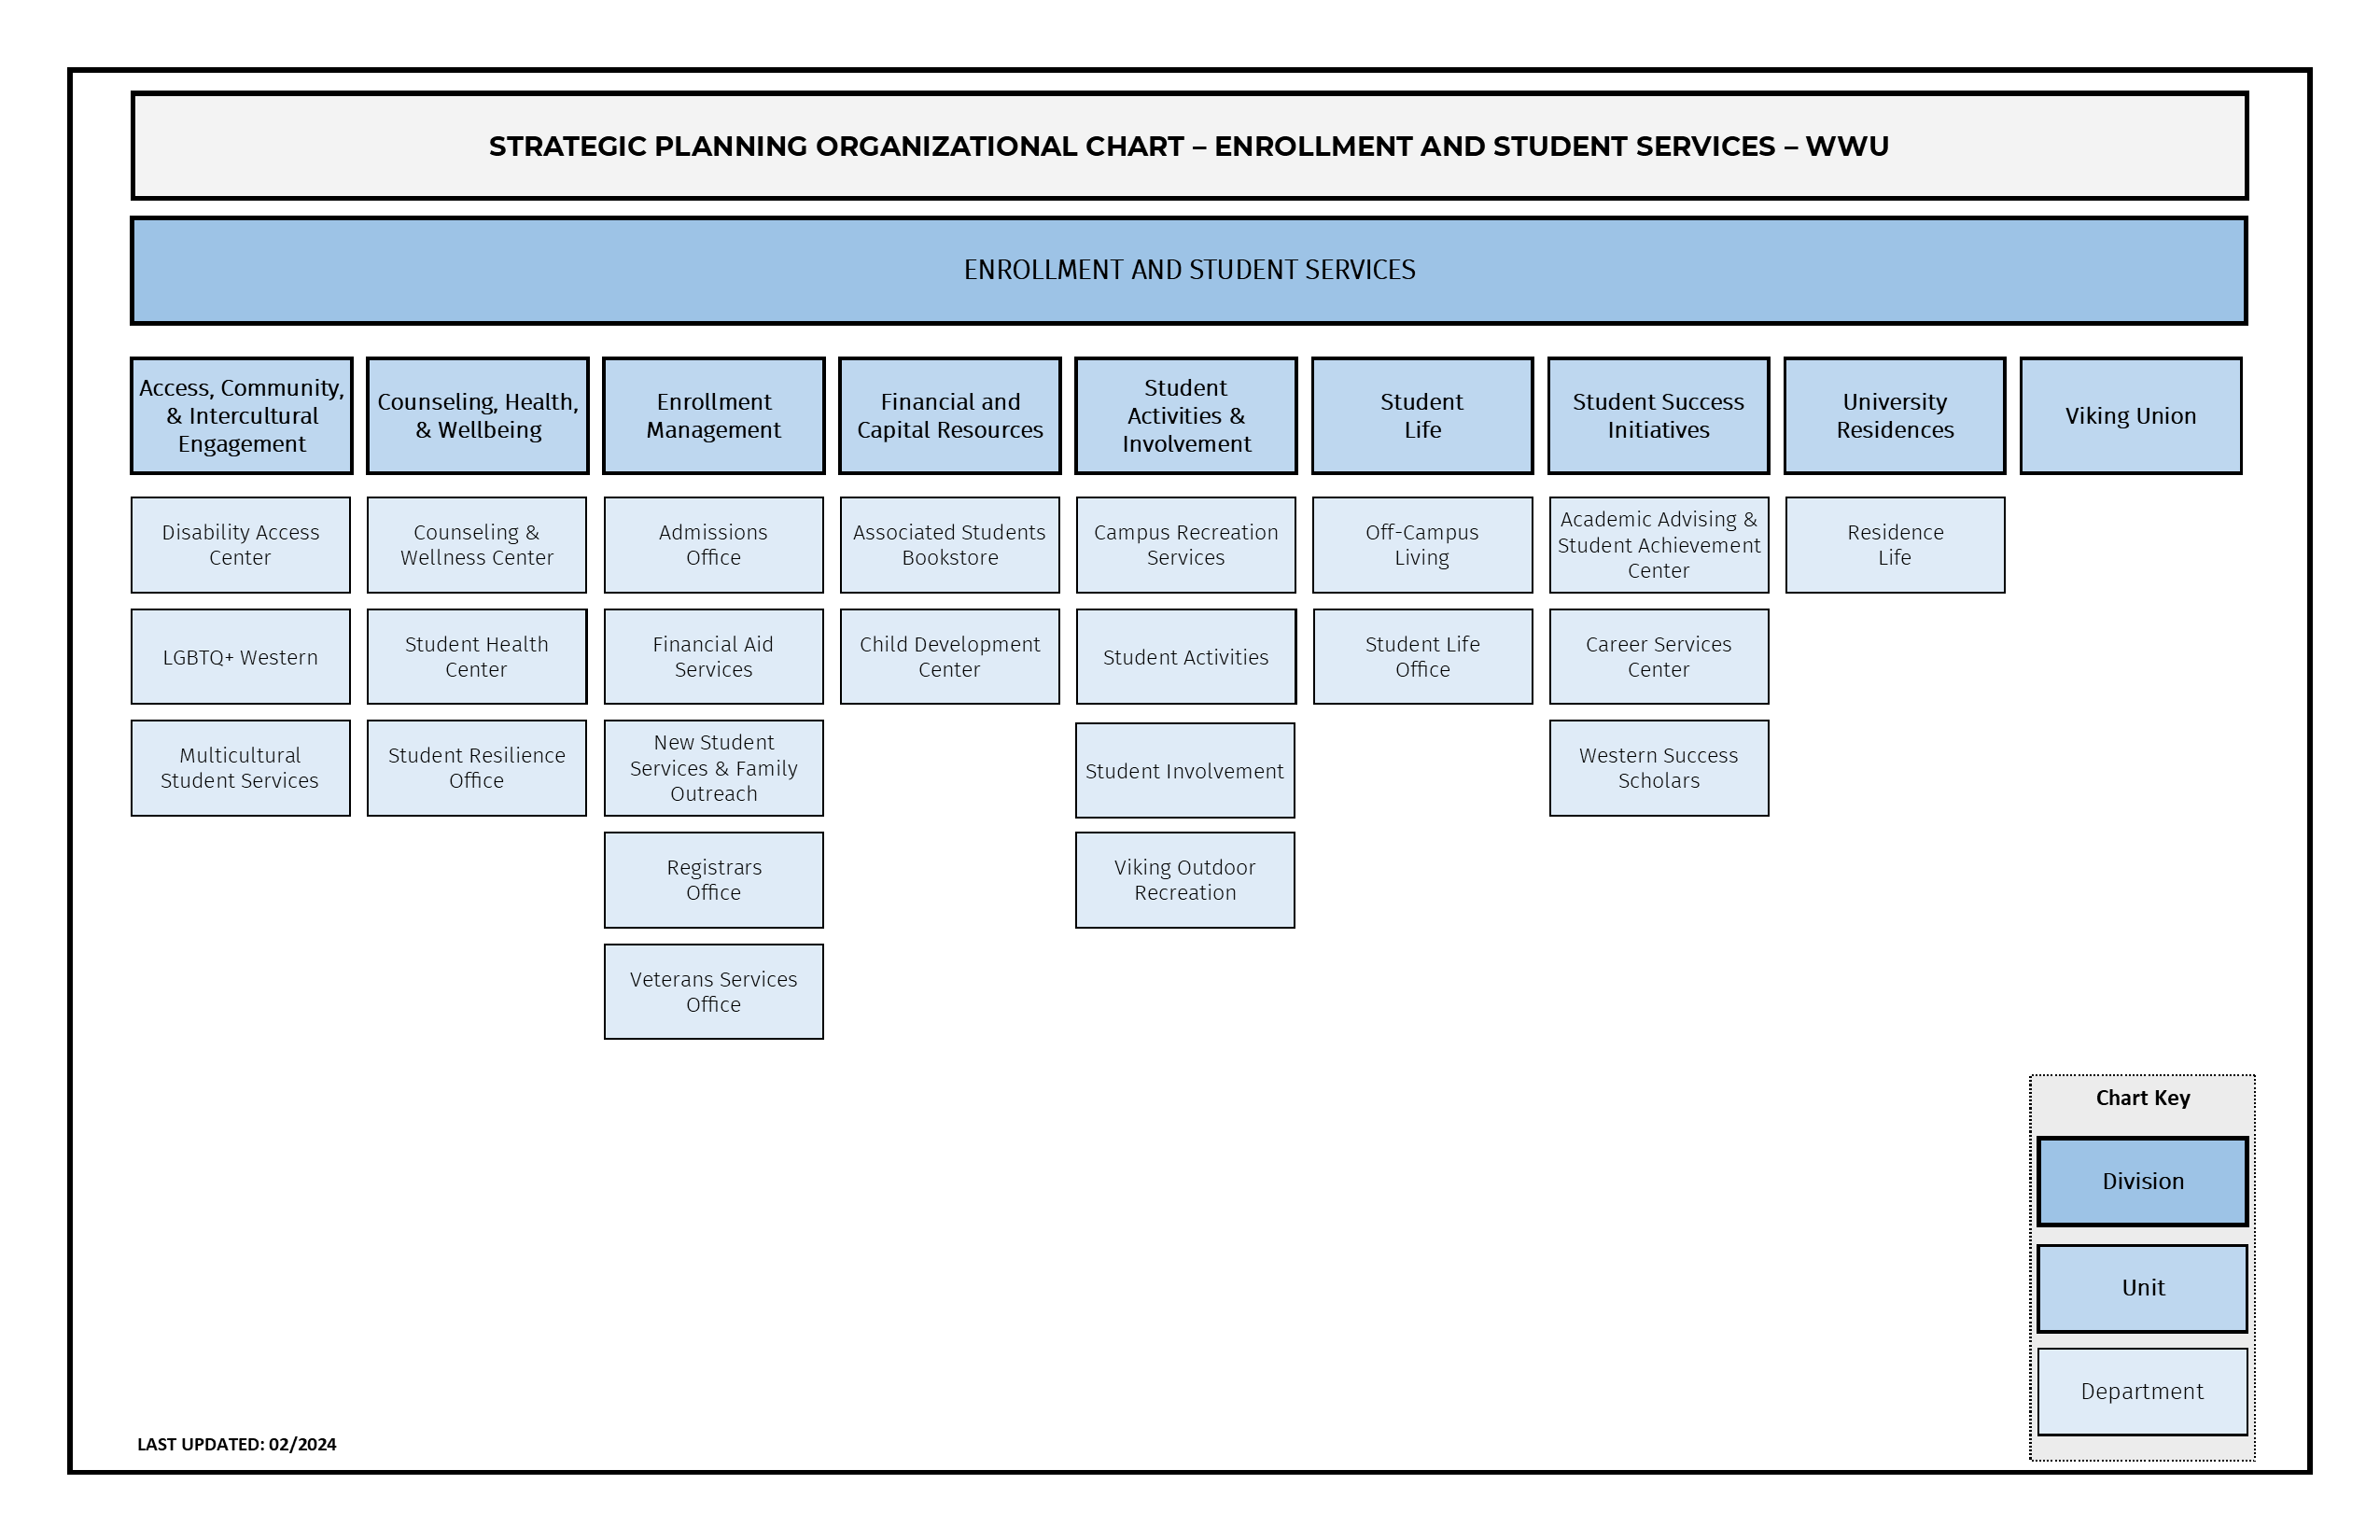 Strategic planning organizational chart for the Enrollment and Student Services division which is described in text below